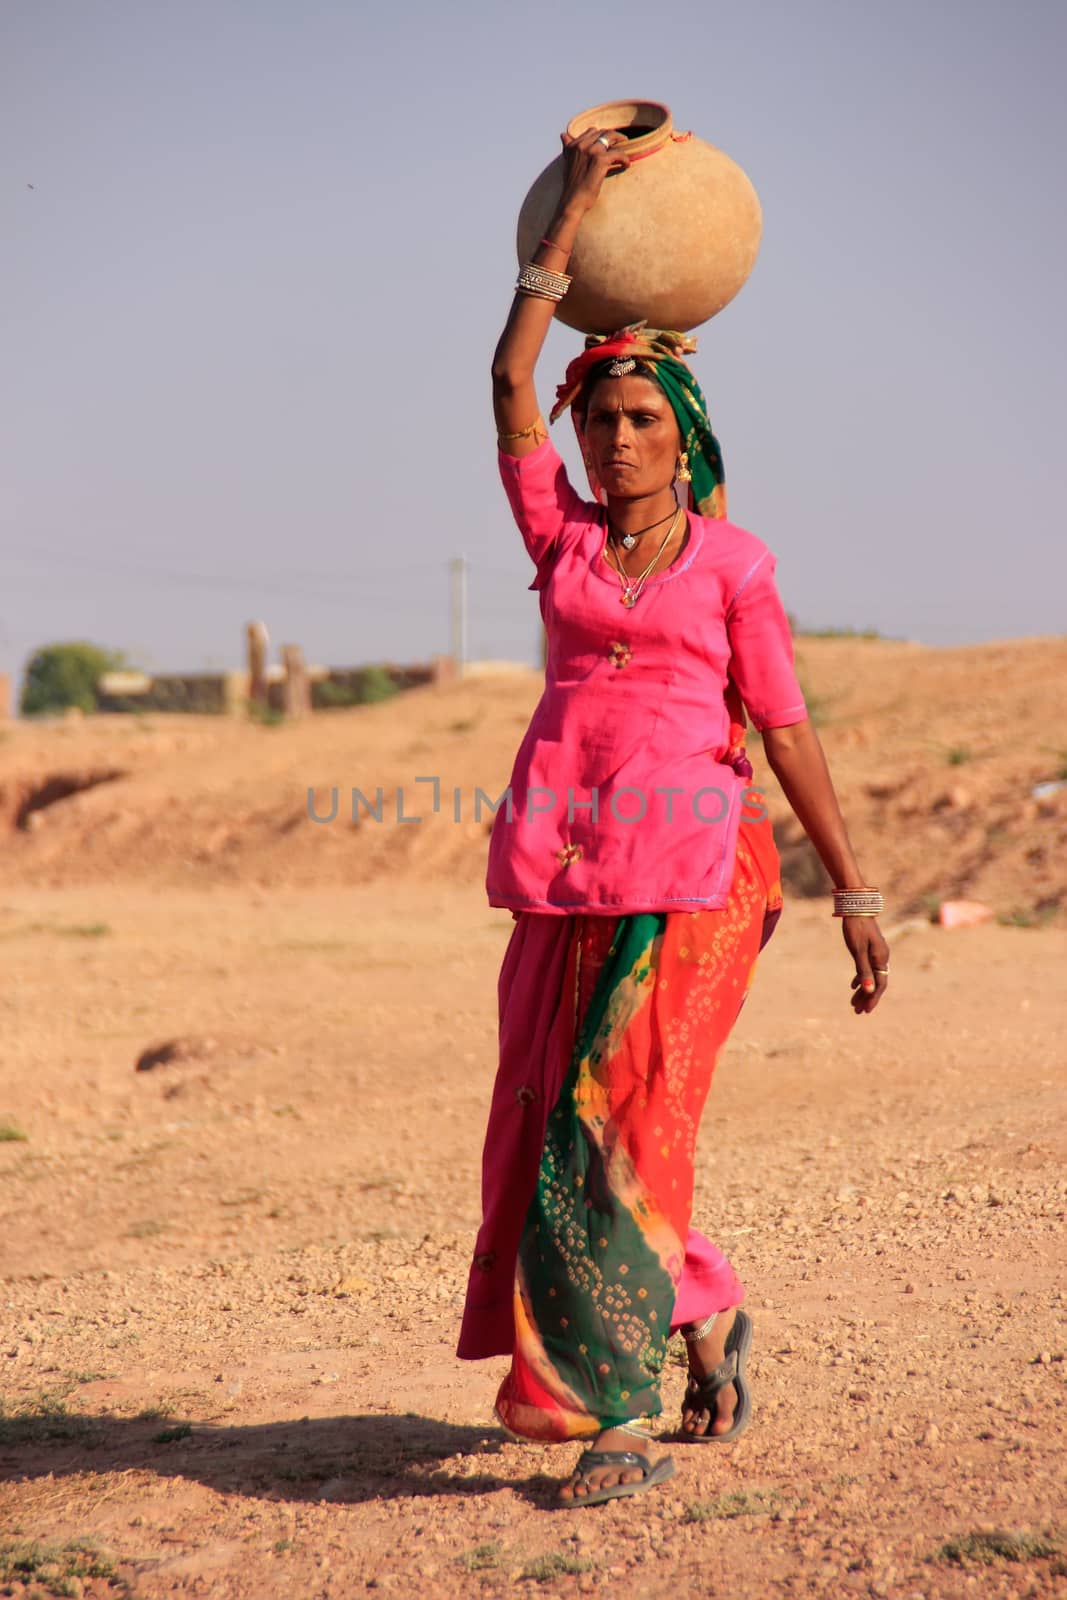 Local woman carrying jar with water on her head, Khichan village, Rajasthan, India